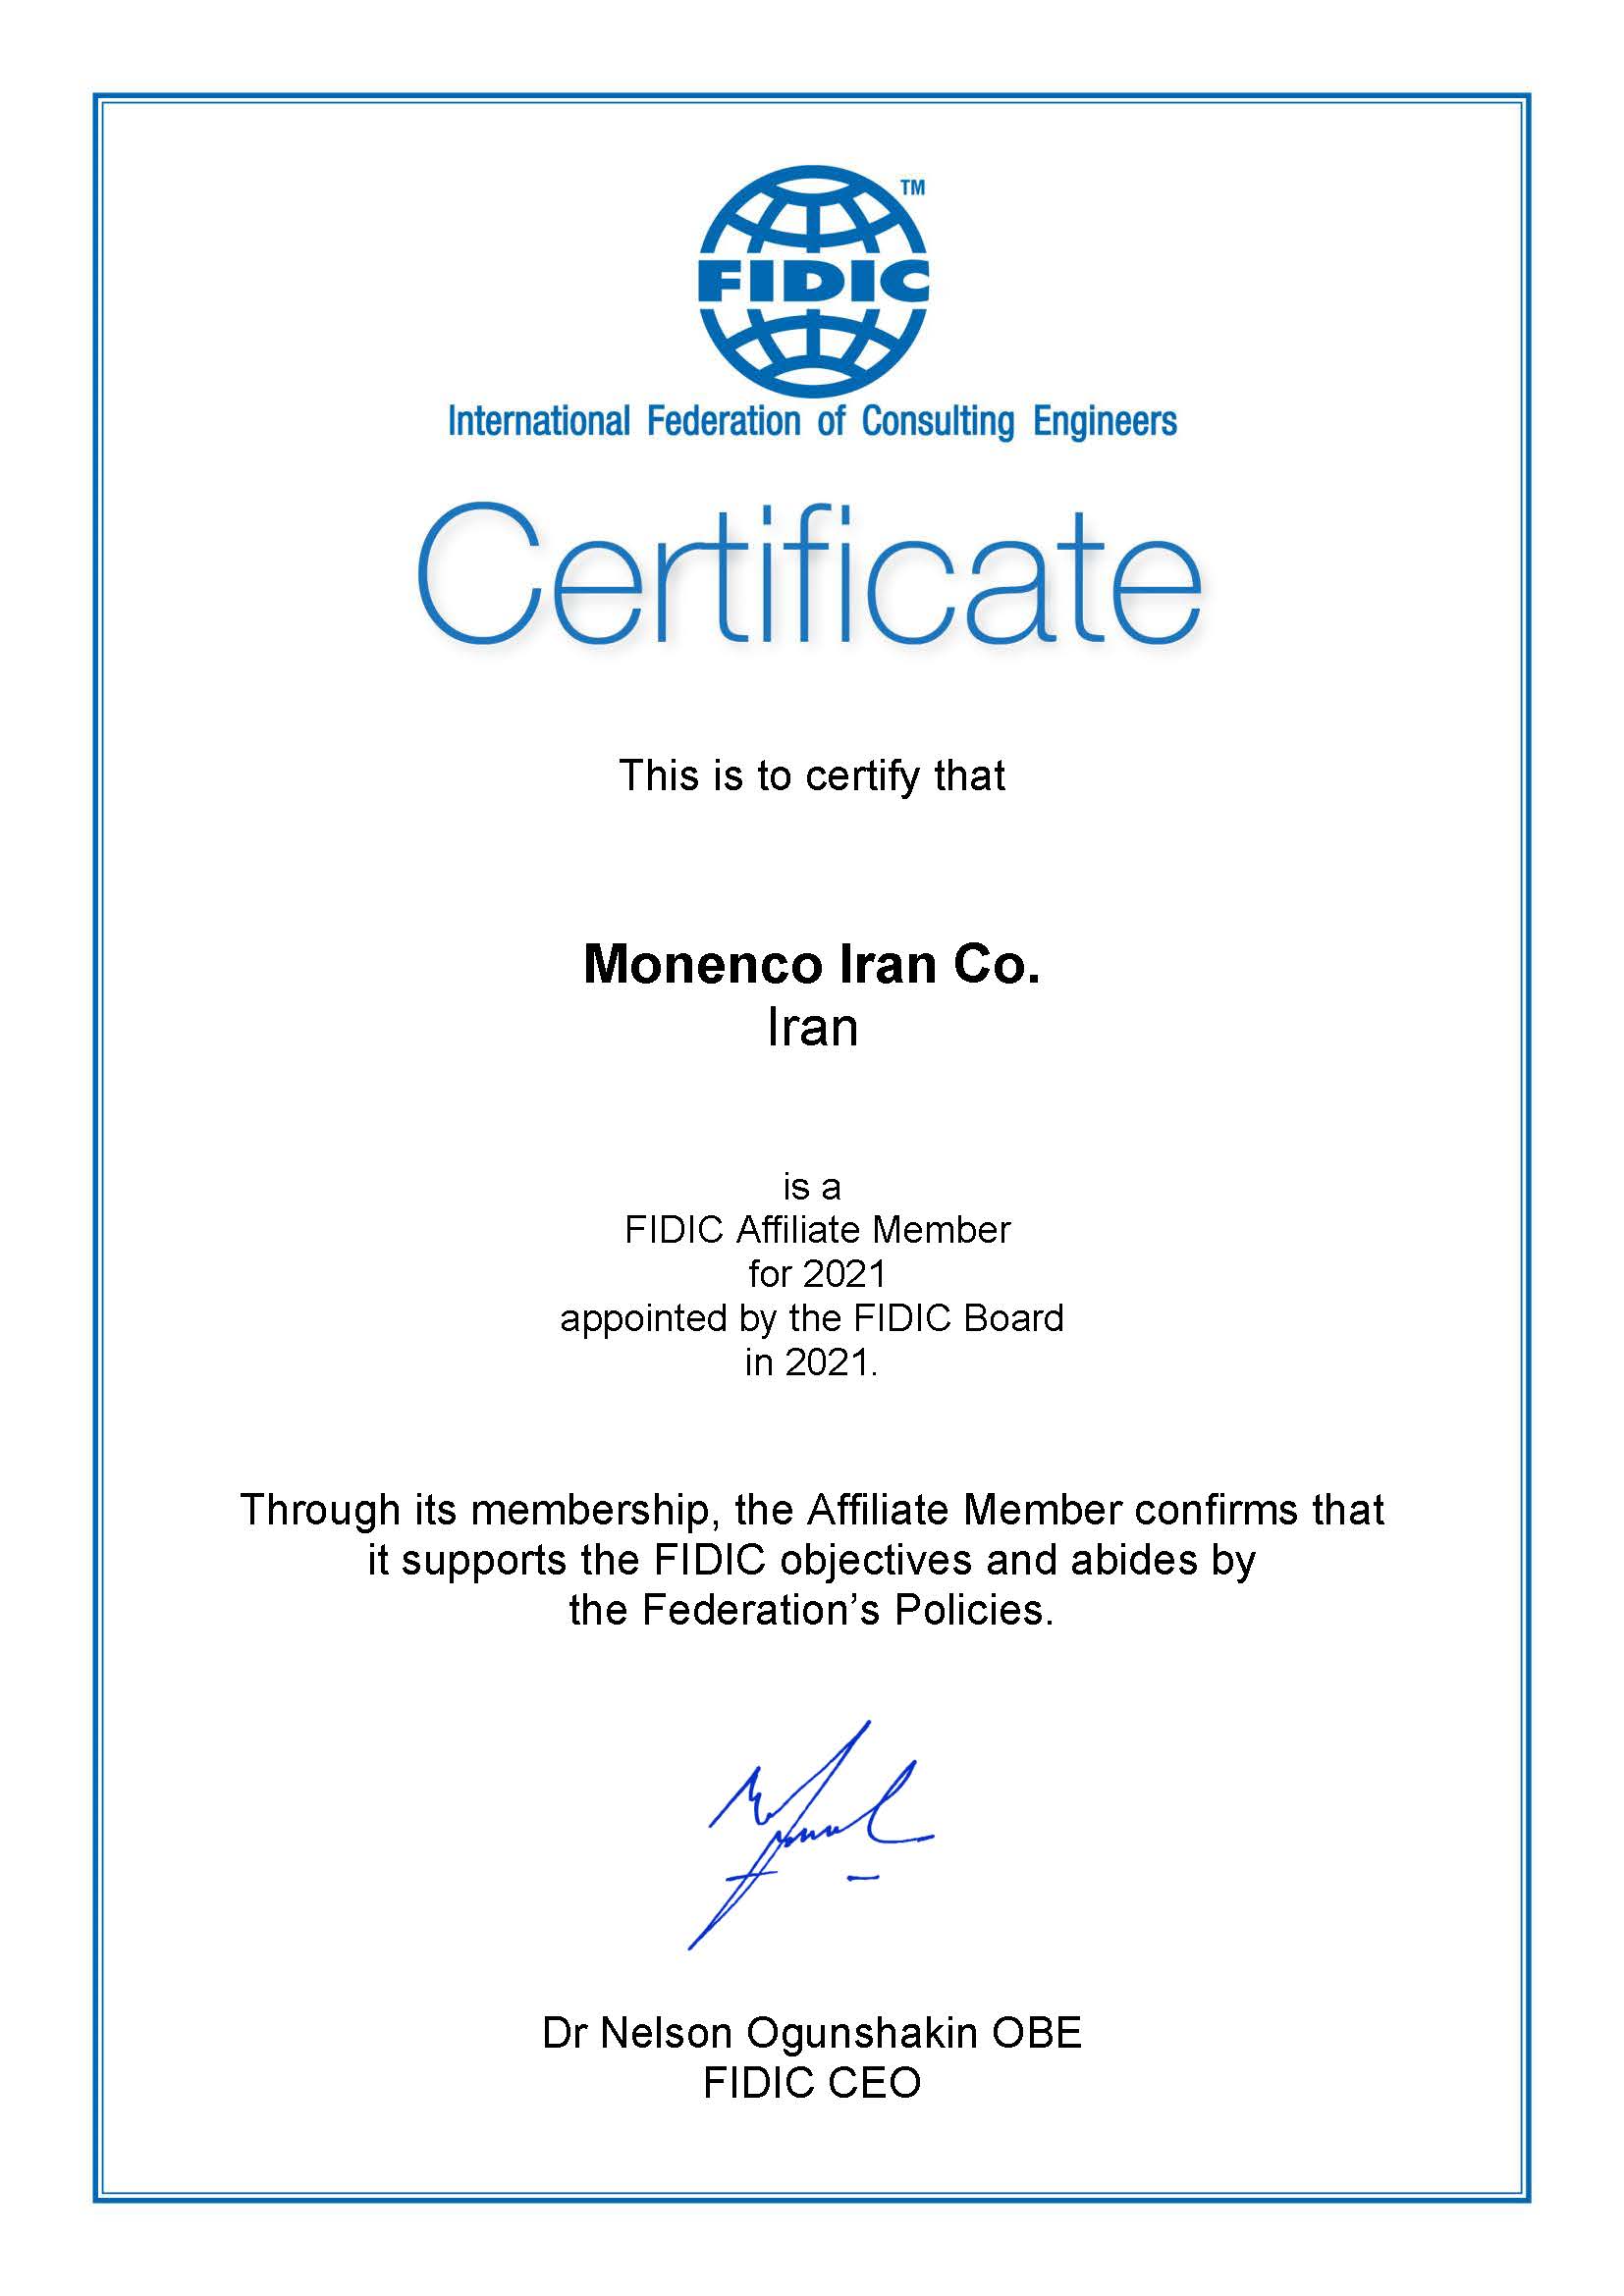 Renewal of Affiliate Membership of Monenco Iran in International Federation of Consulting Engineers (FIDIC) 